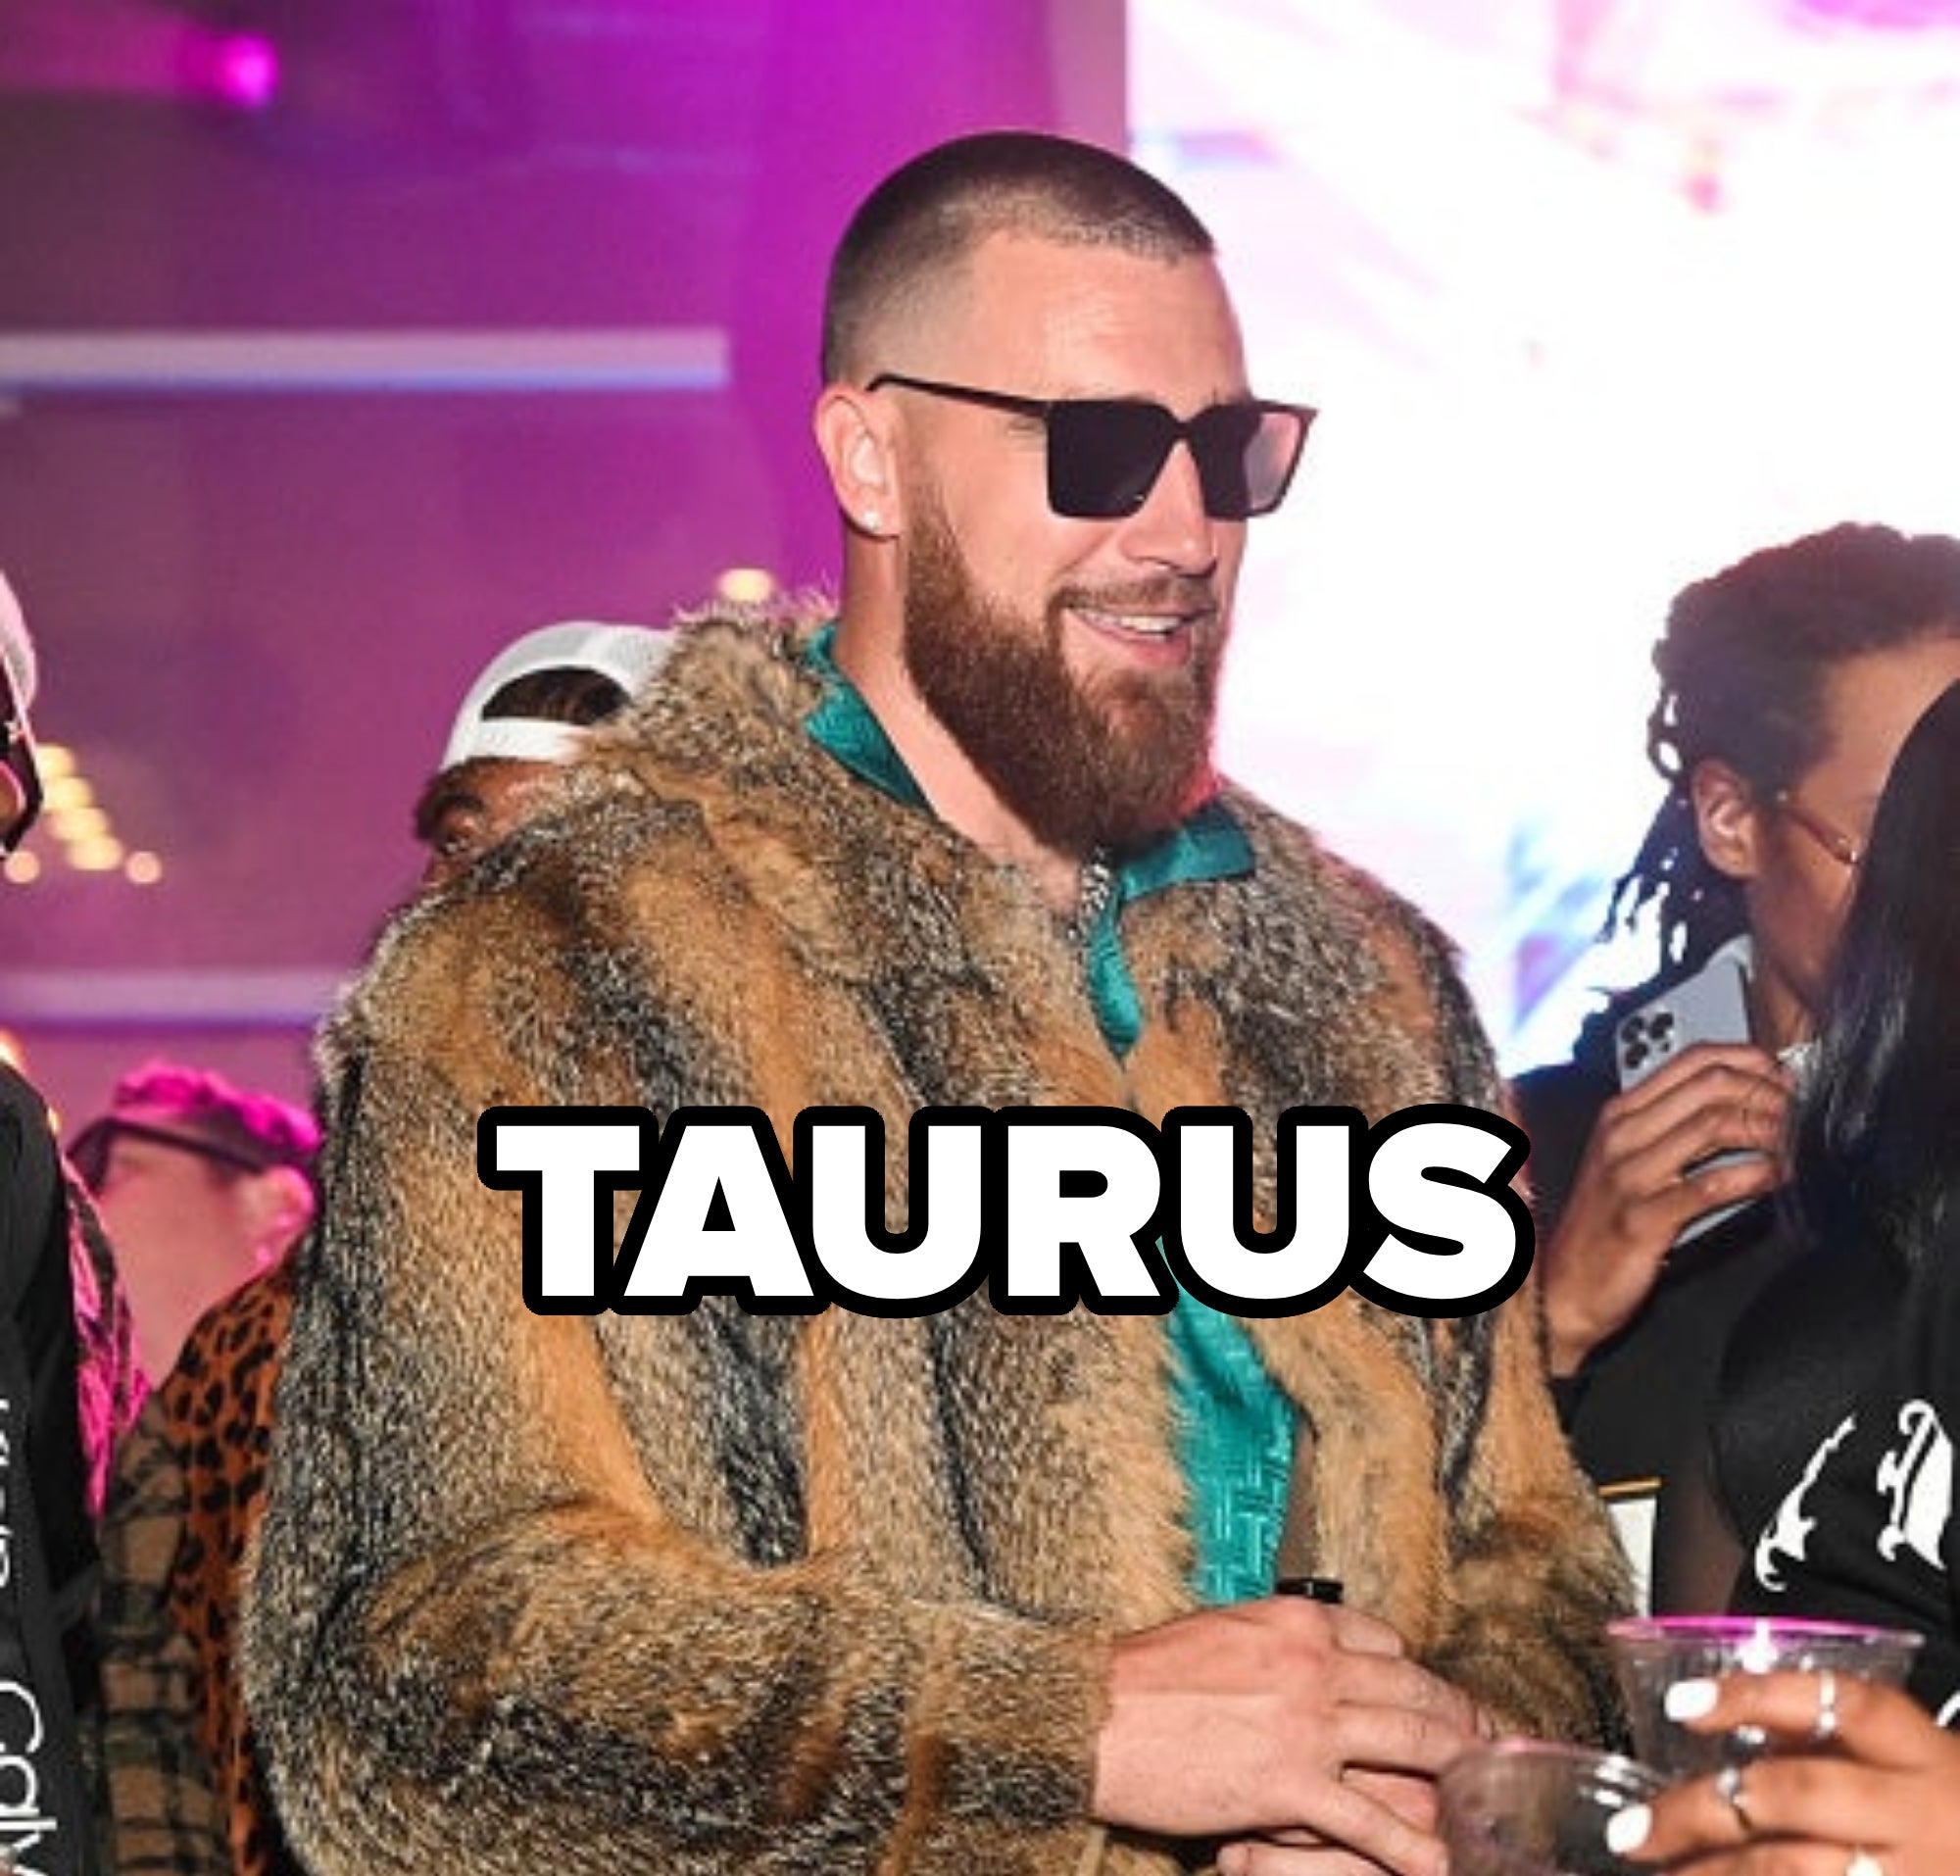 him in fur coat at a party with the text over reading taurus